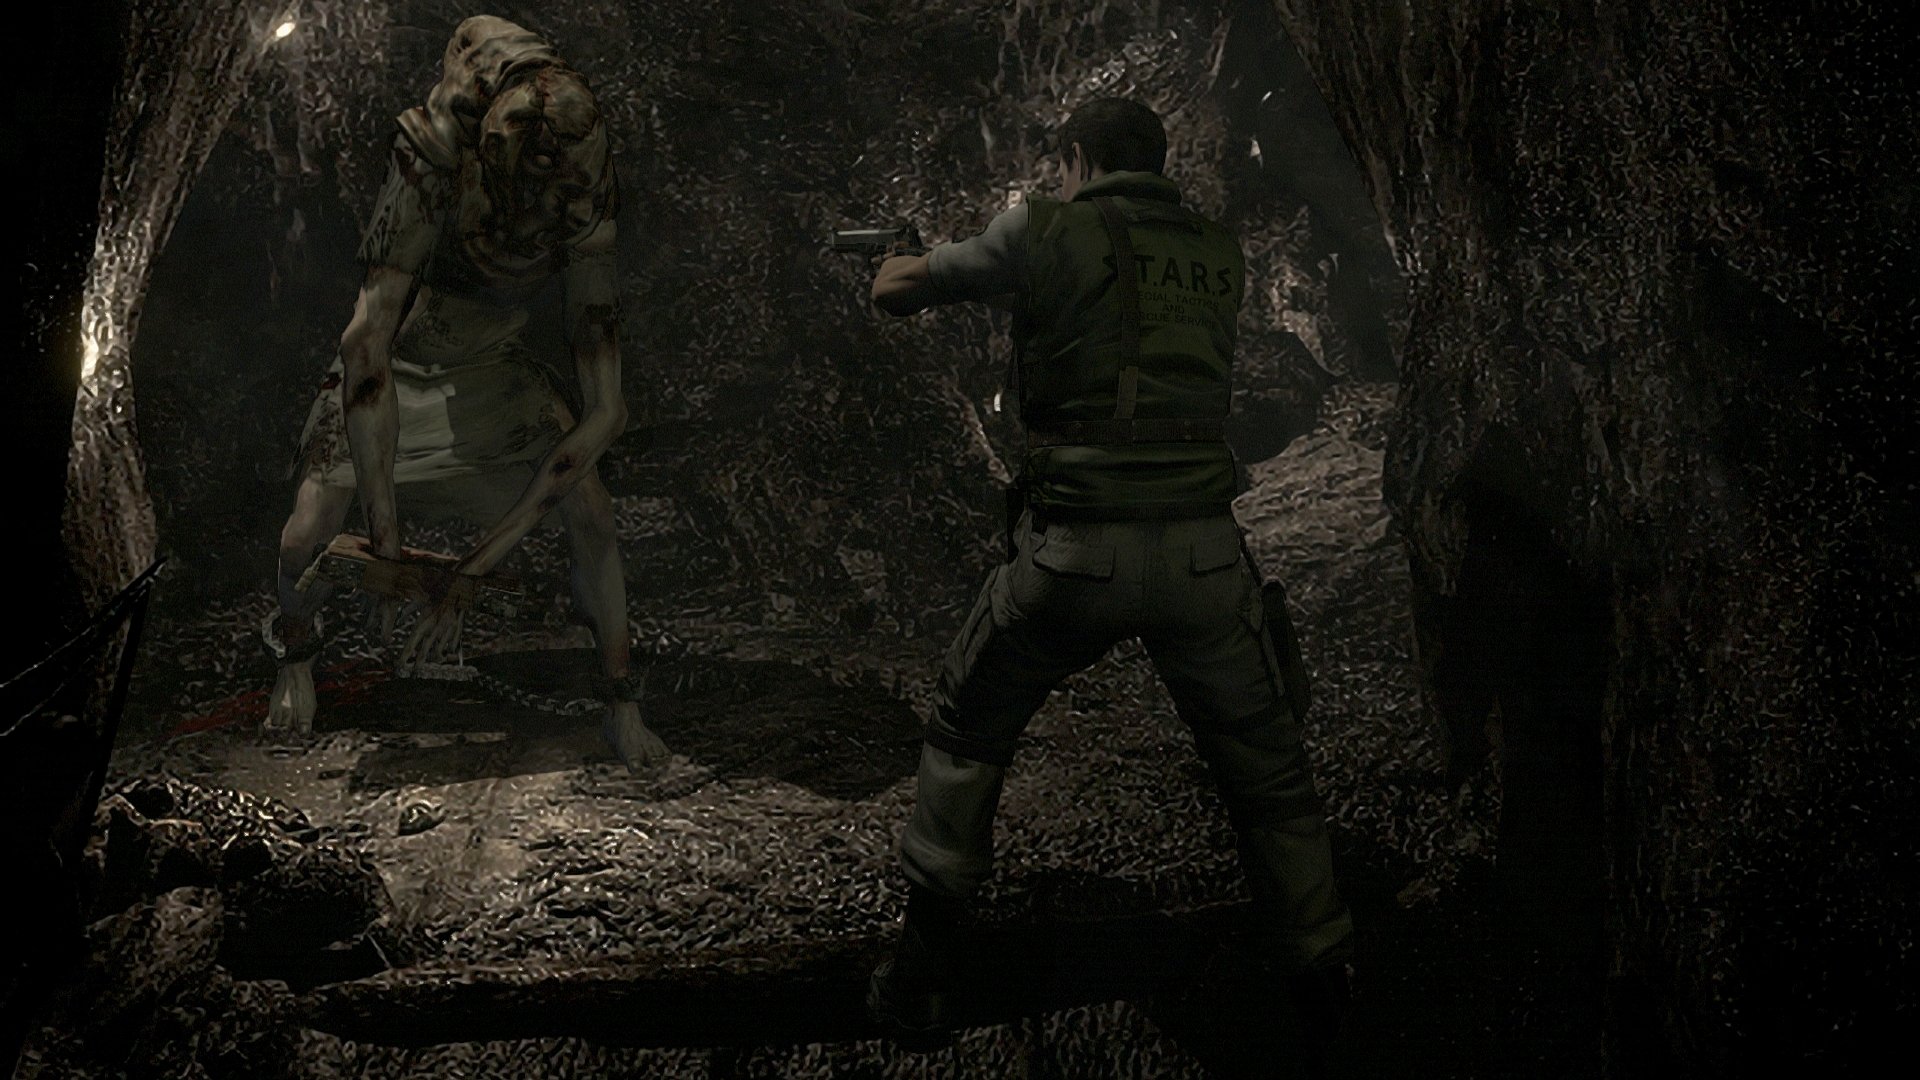 Resident Evil remake will itself get remade—in HD